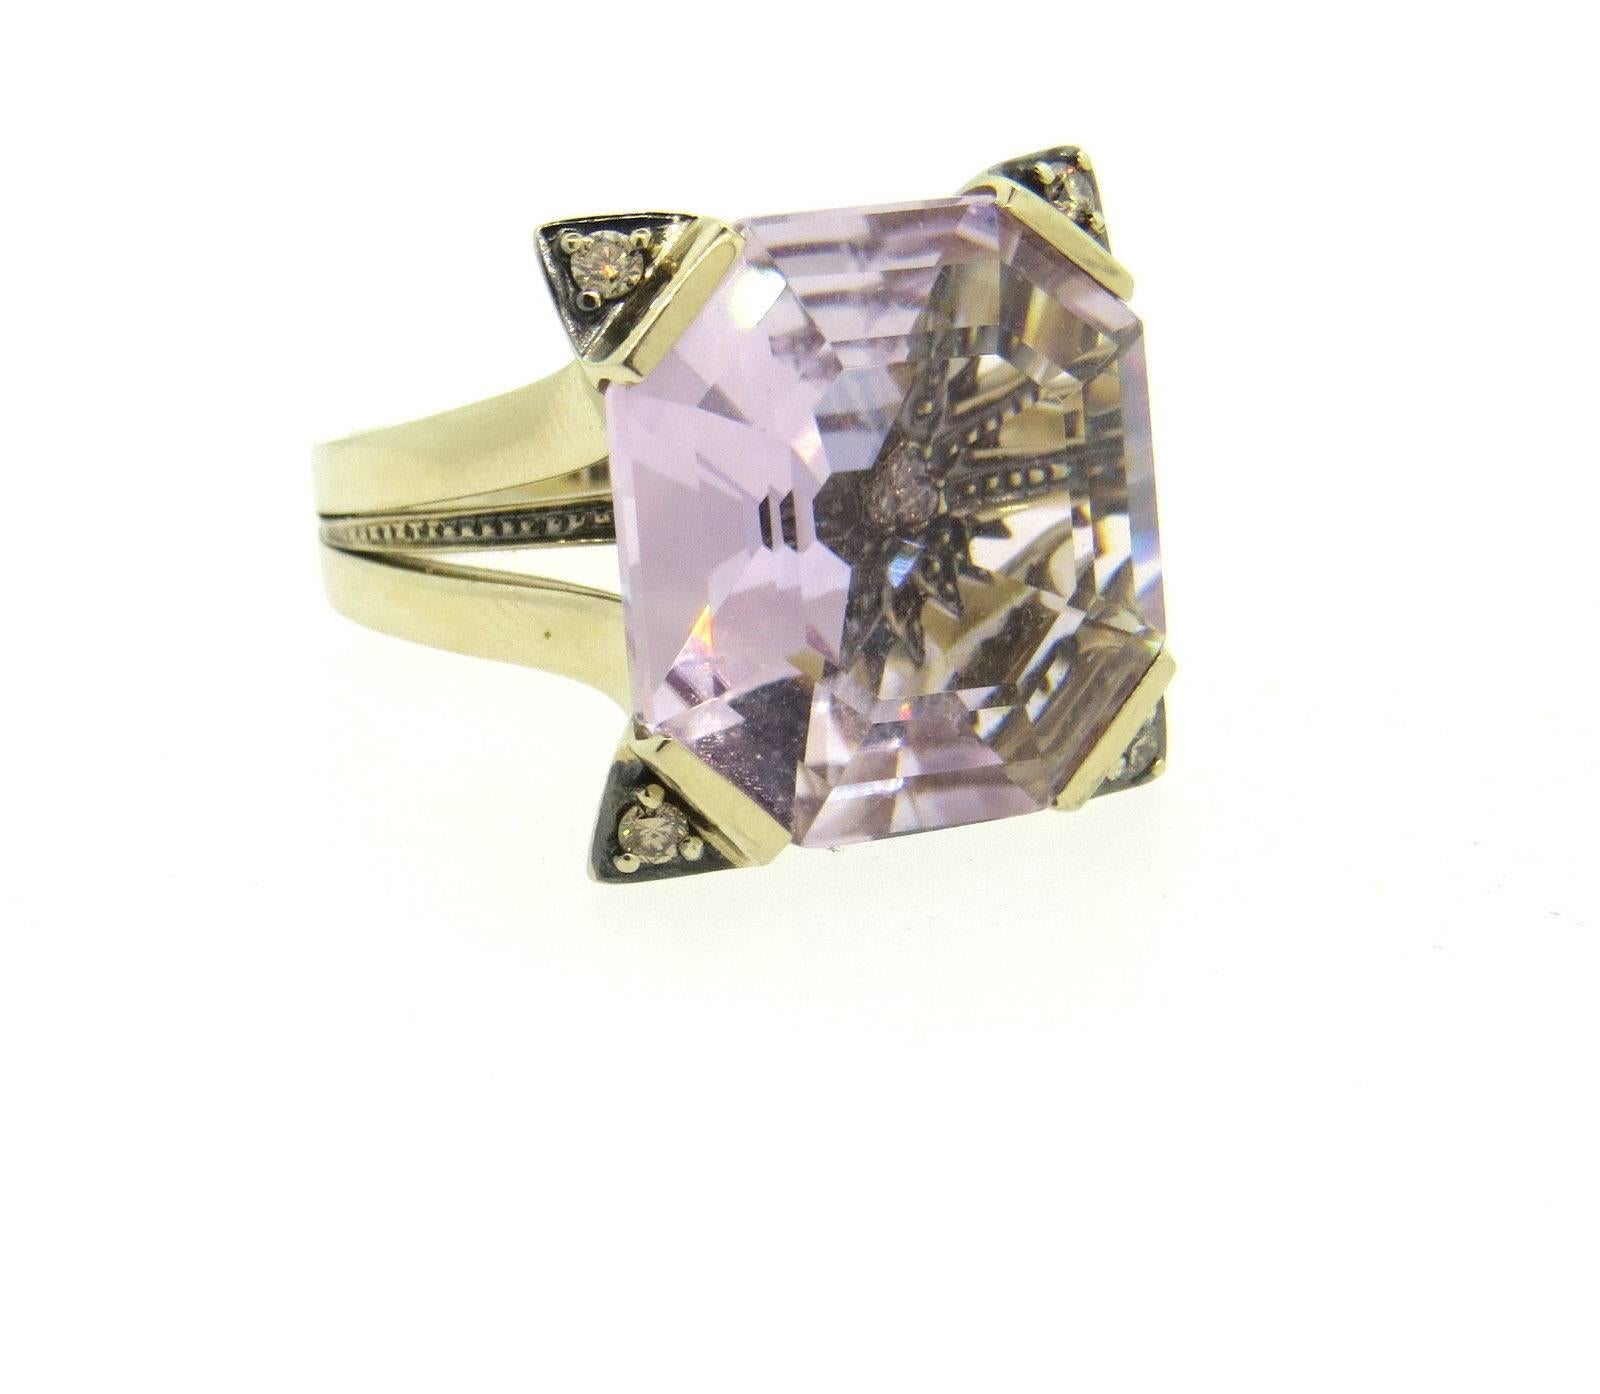 An 18k yellow gold ring set with purple quartz and approx. 0.04ctw of diamonds.  The ring size 5 1/2, ring top is 17.6mm x 16.6mm. Marked: S mark, Star, 750.  Weight of the ring is 12.8 grams.